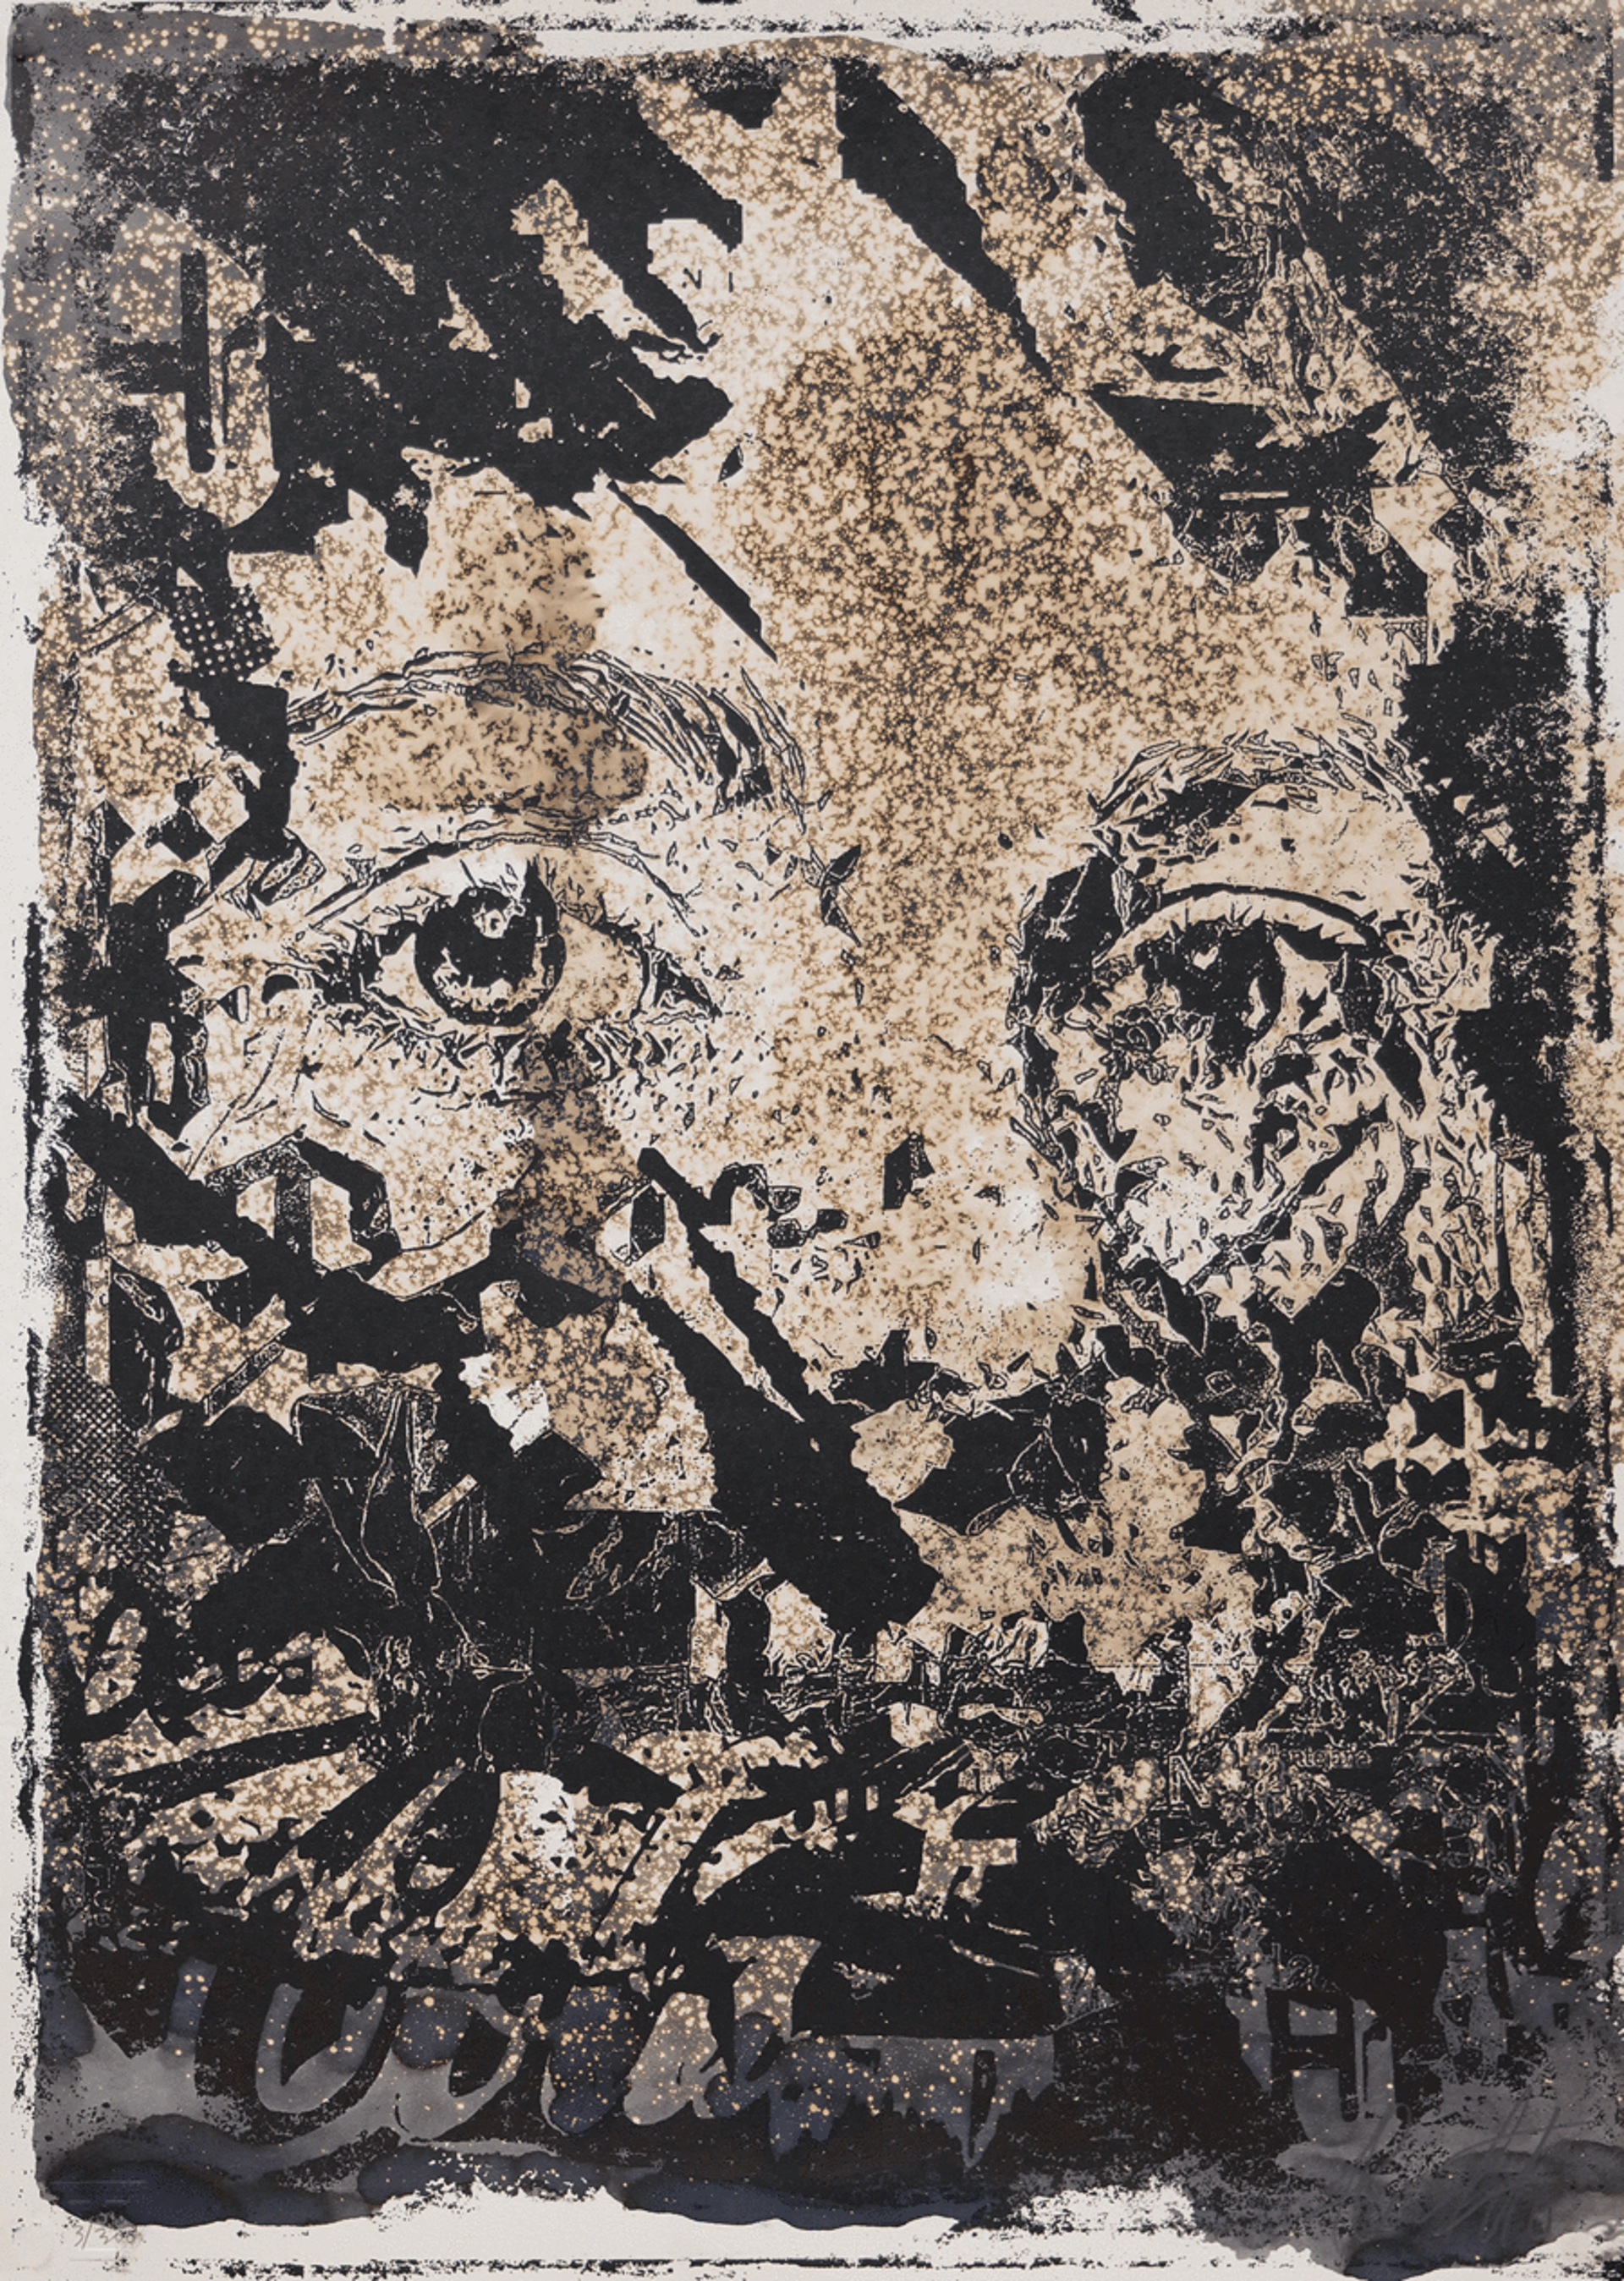 Intangible by Vhils